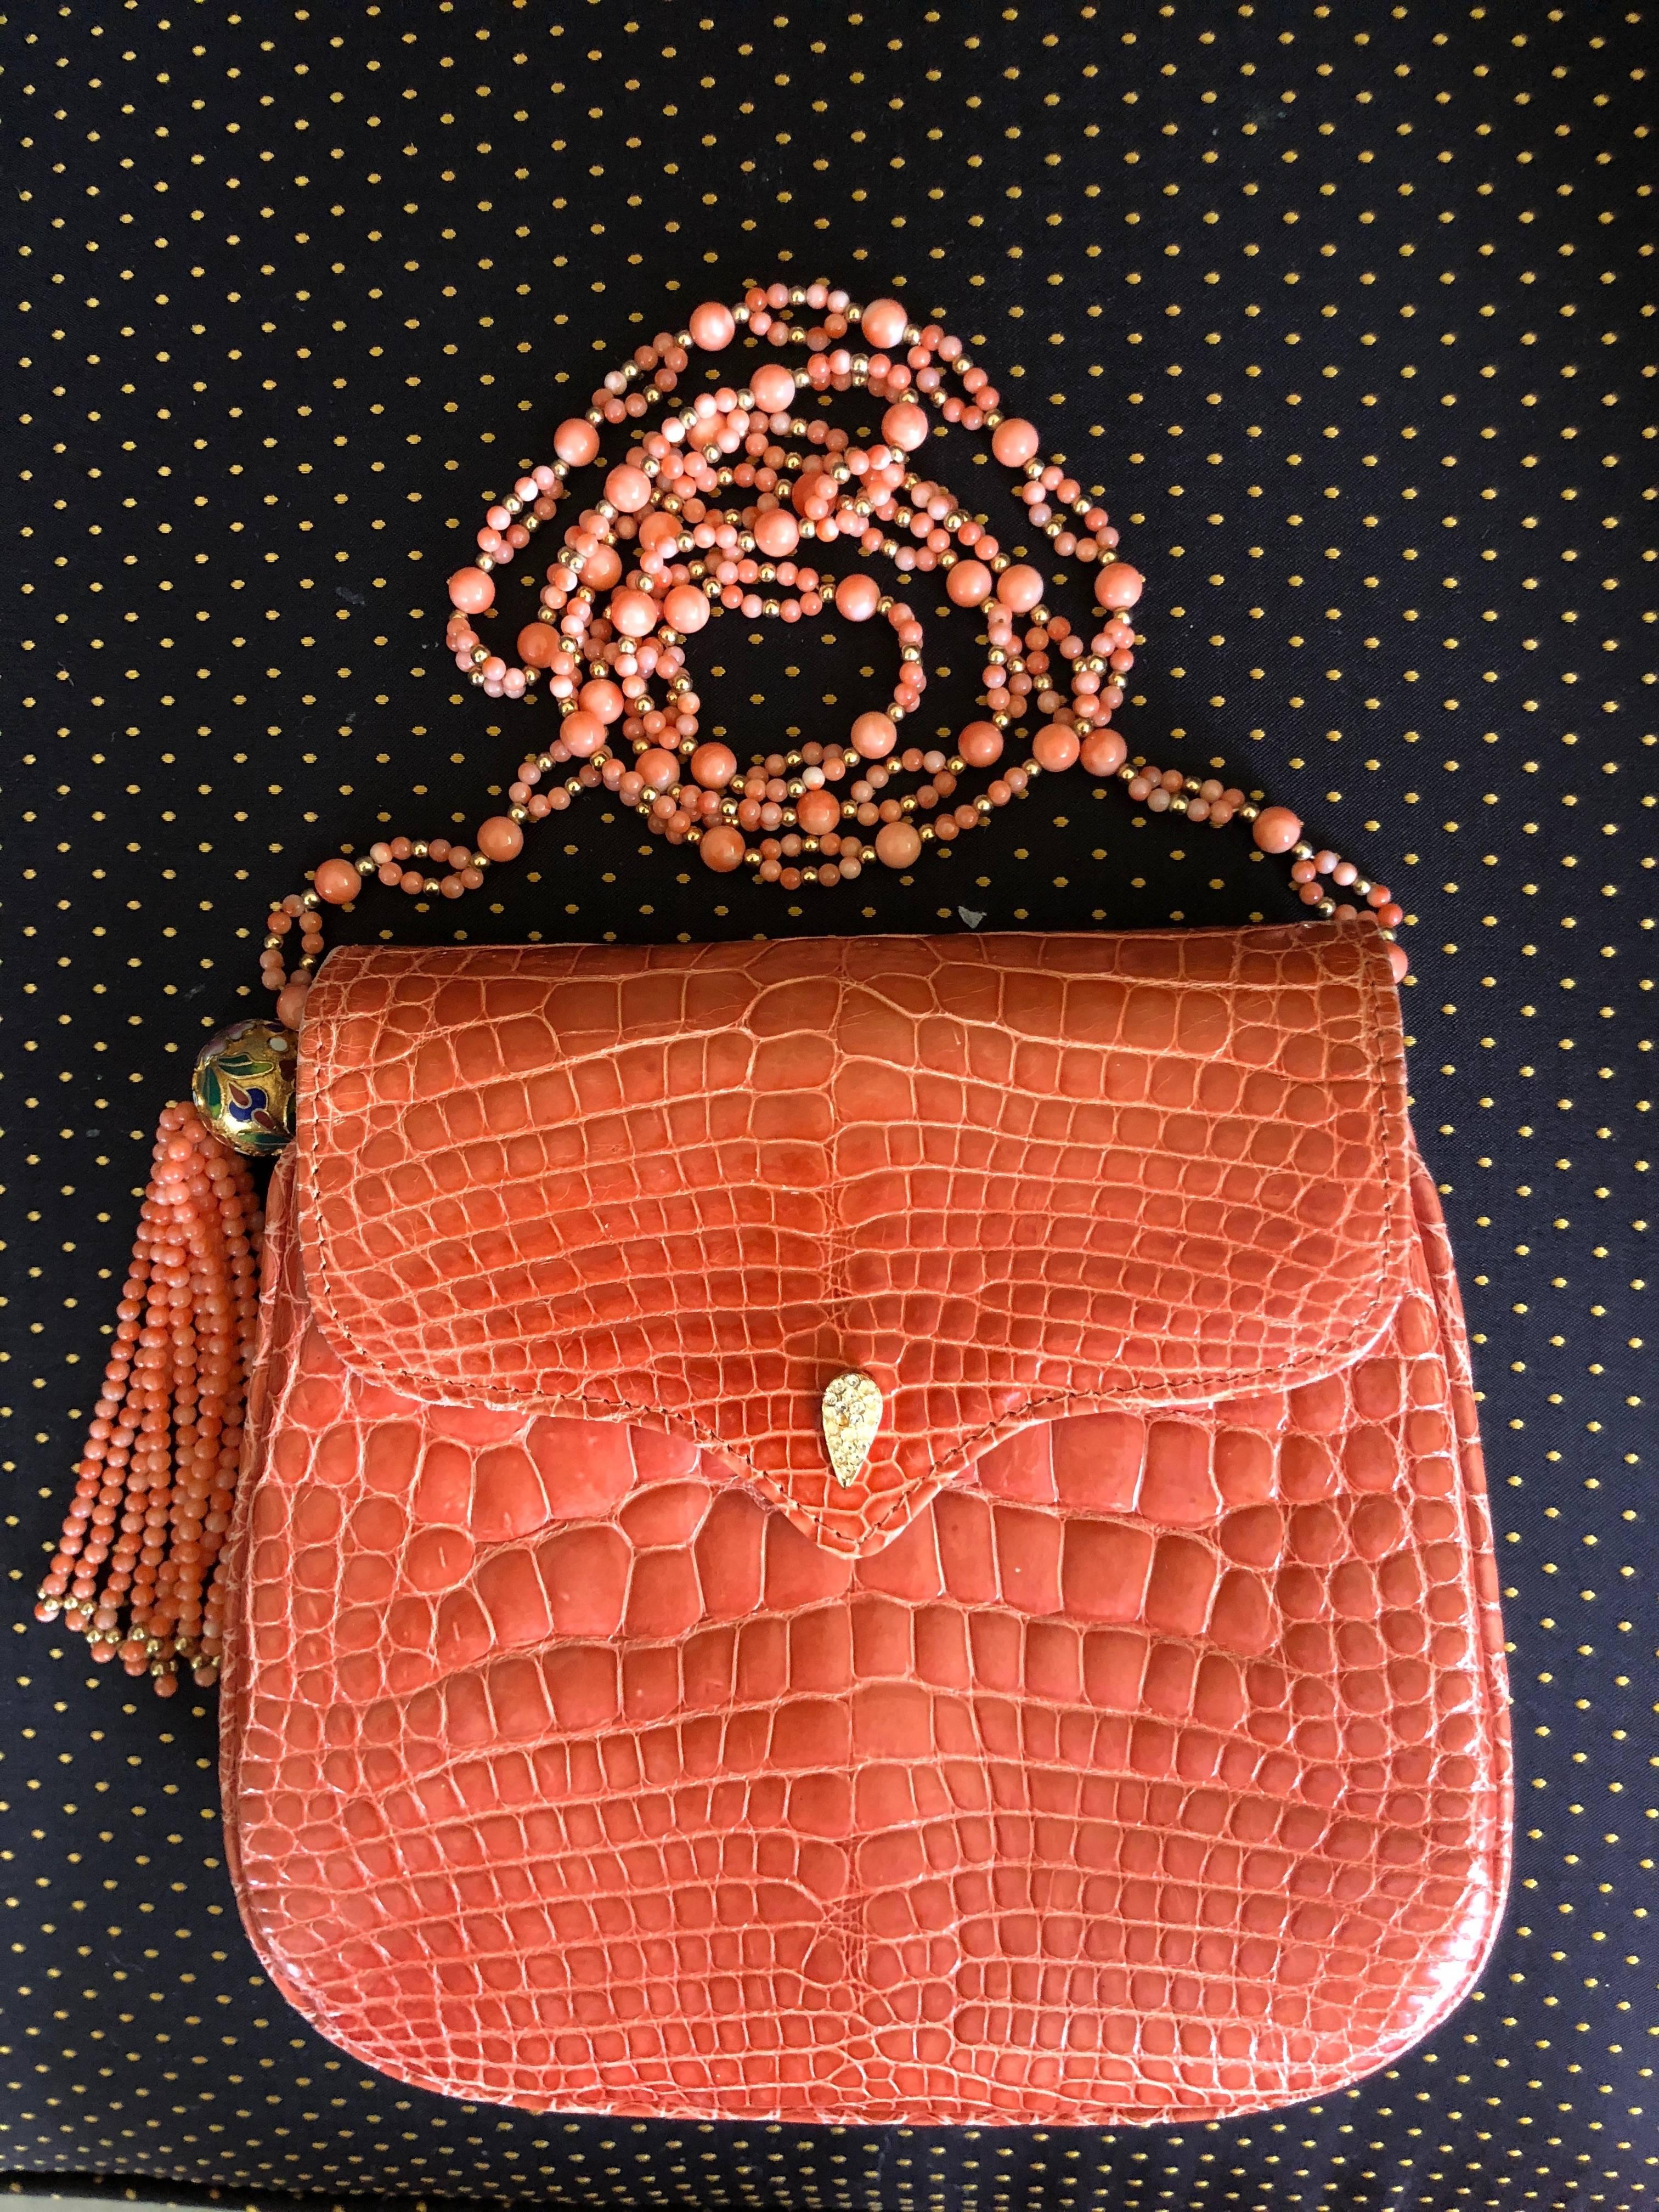  Lana of London Exquisite Orange Crocodile Evening Bag with Coral Bead Strap For Sale 5